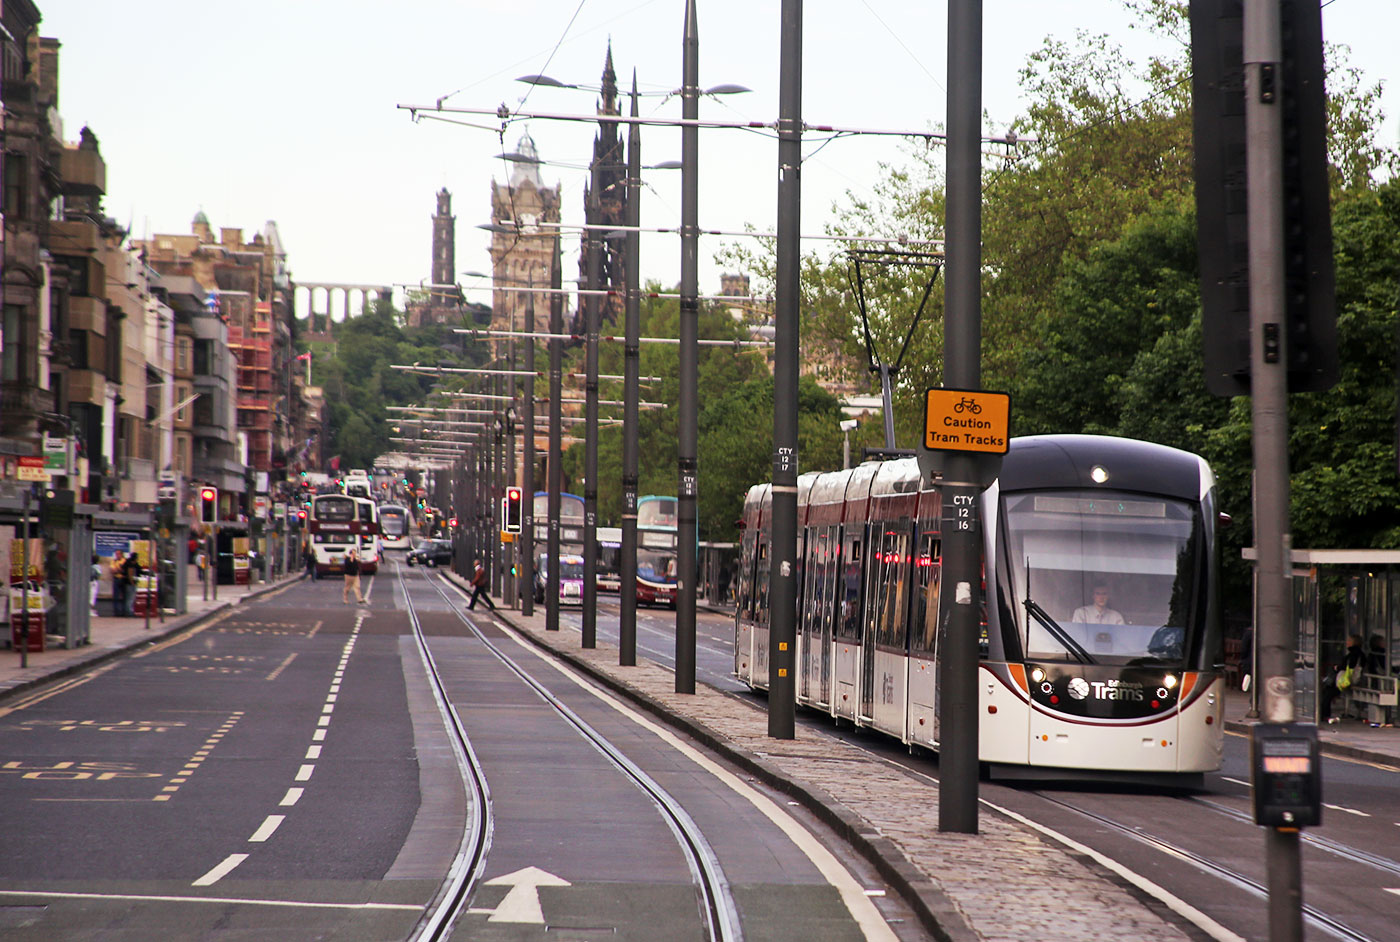 Edinburgh Tram Service  -  A tram waits at the lights before entering Princes Street on its journey to York Place  -  June 2014